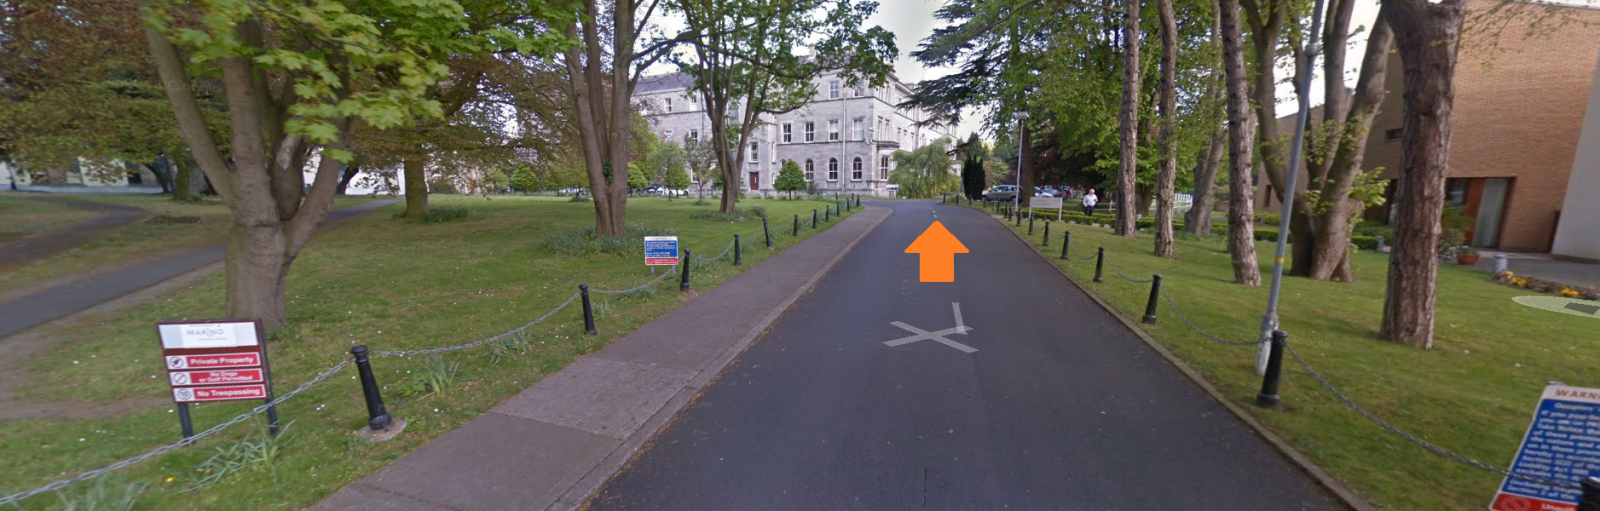 View inside Marino gate, long road up to building, orange arrow indicates to move towards building